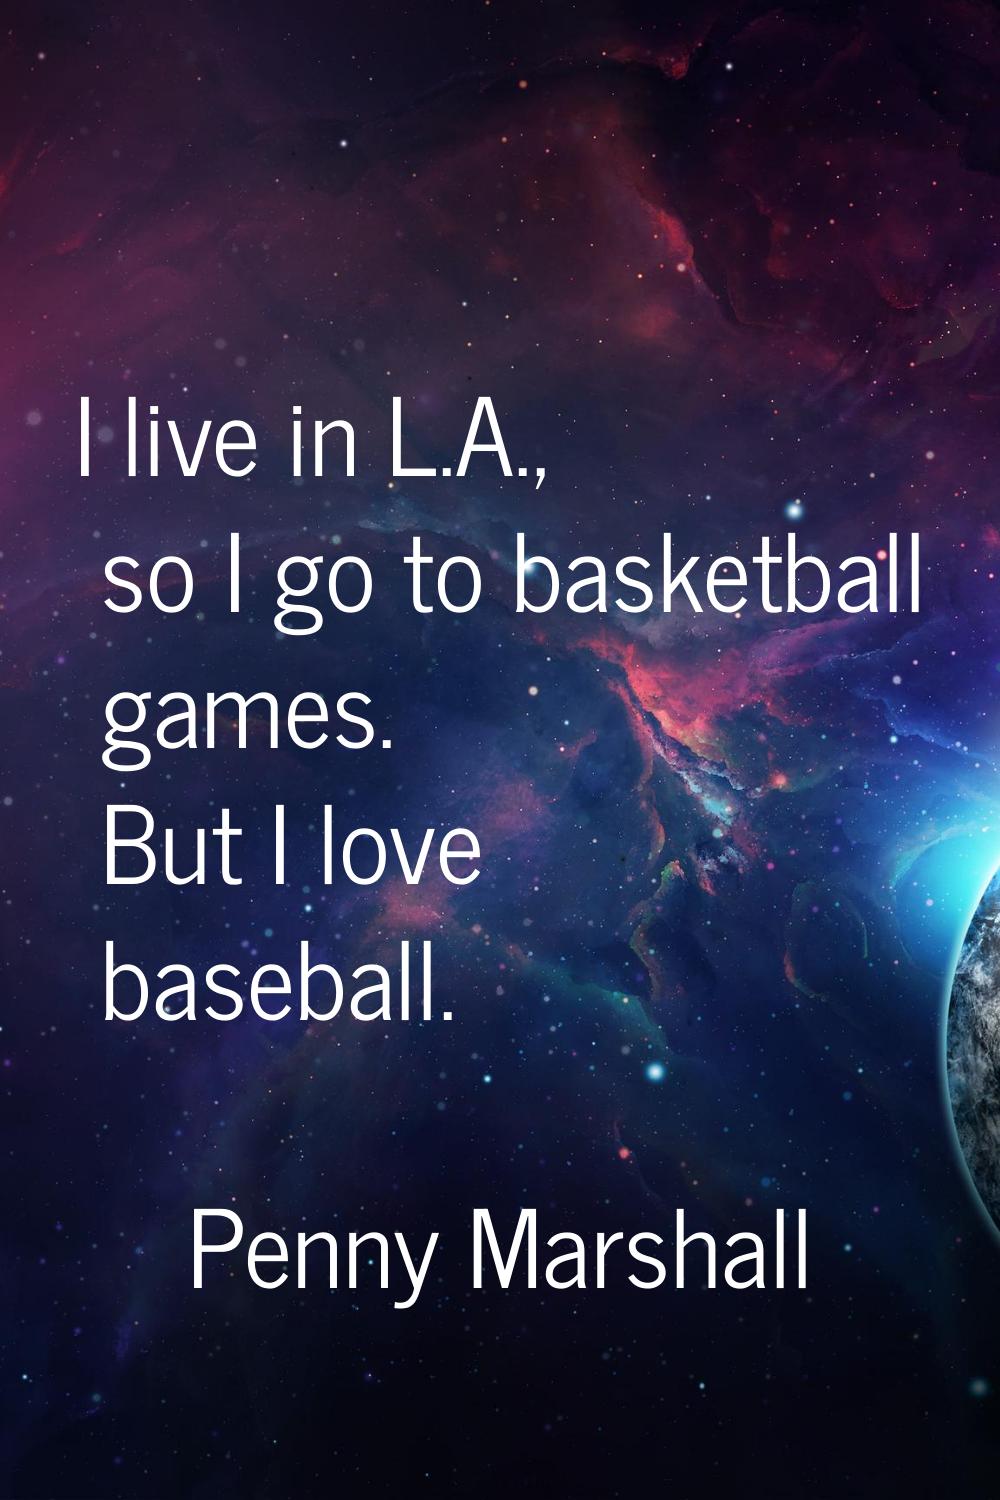 I live in L.A., so I go to basketball games. But I love baseball.